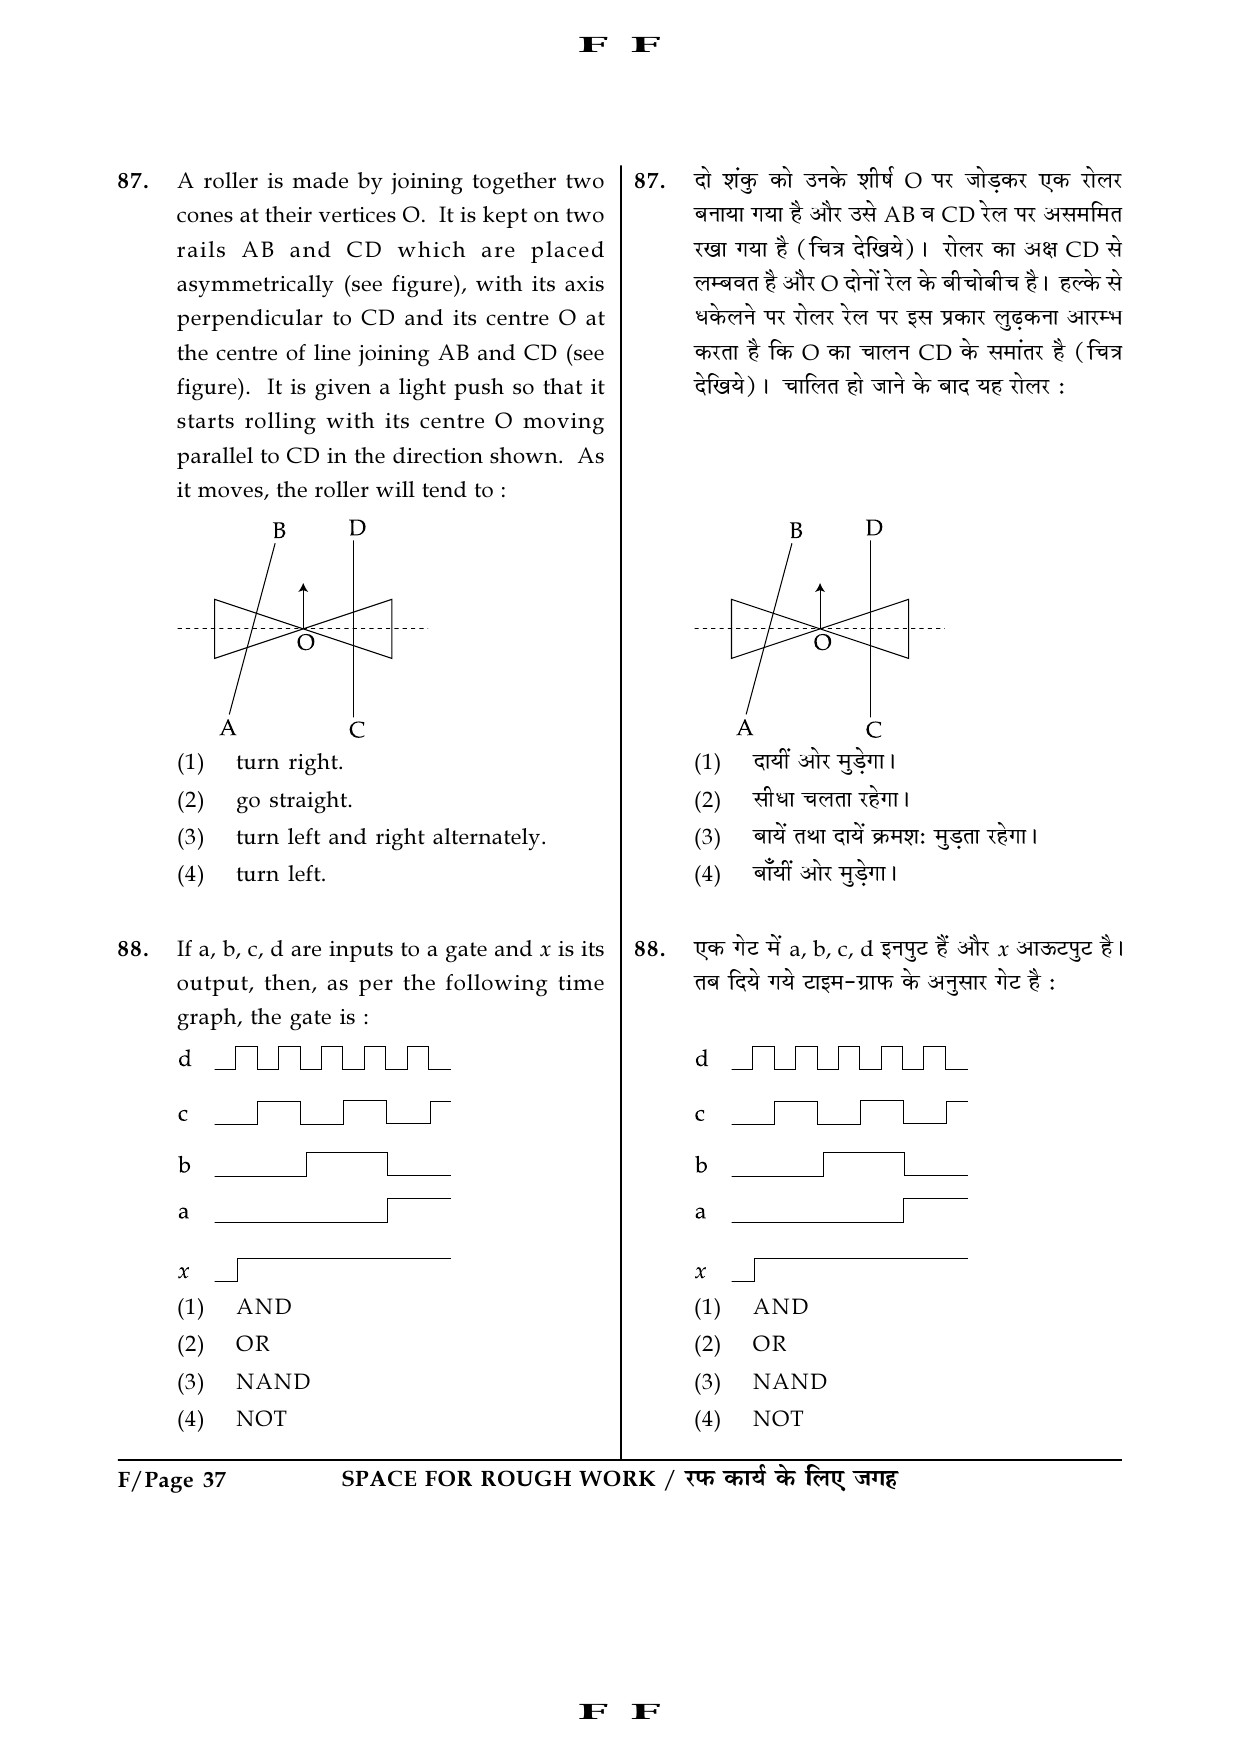 JEE Main Exam Question Paper 2016 Booklet F 37